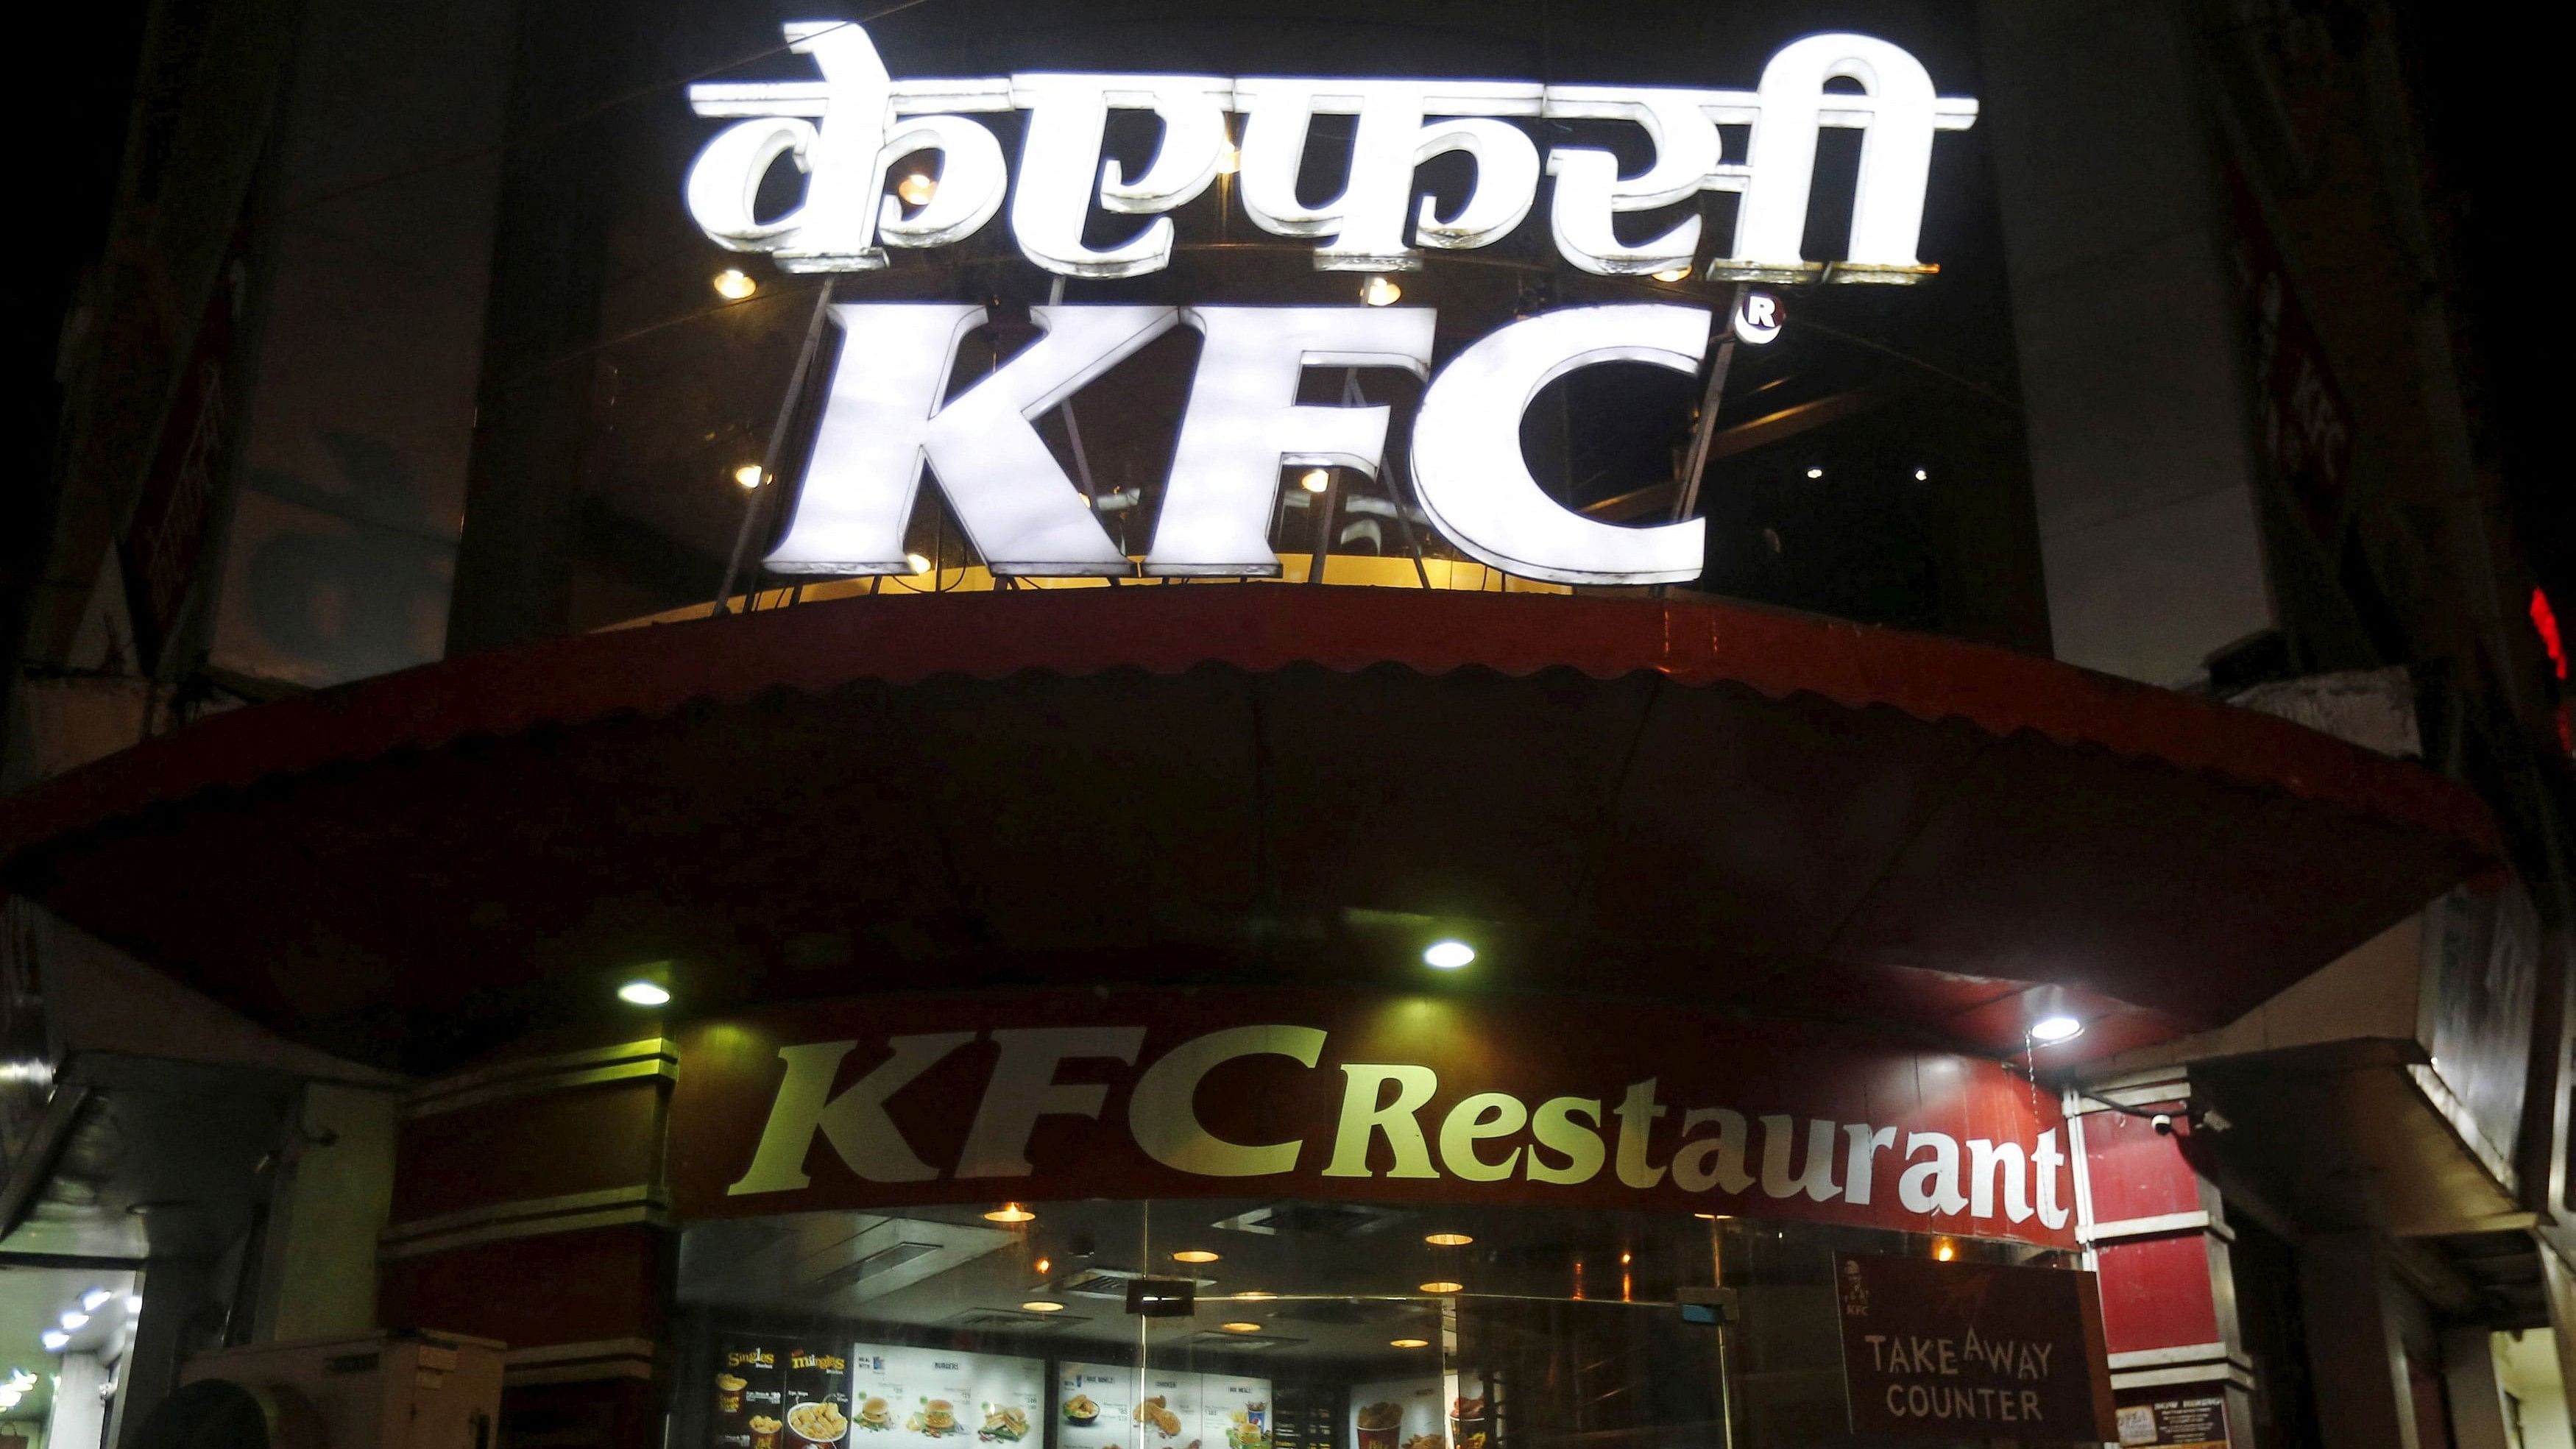 <div class="paragraphs"><p>A Kentucky Fried Chicken (KFC) restaurant is pictured at a market in Mumbai, India.&nbsp;</p></div>